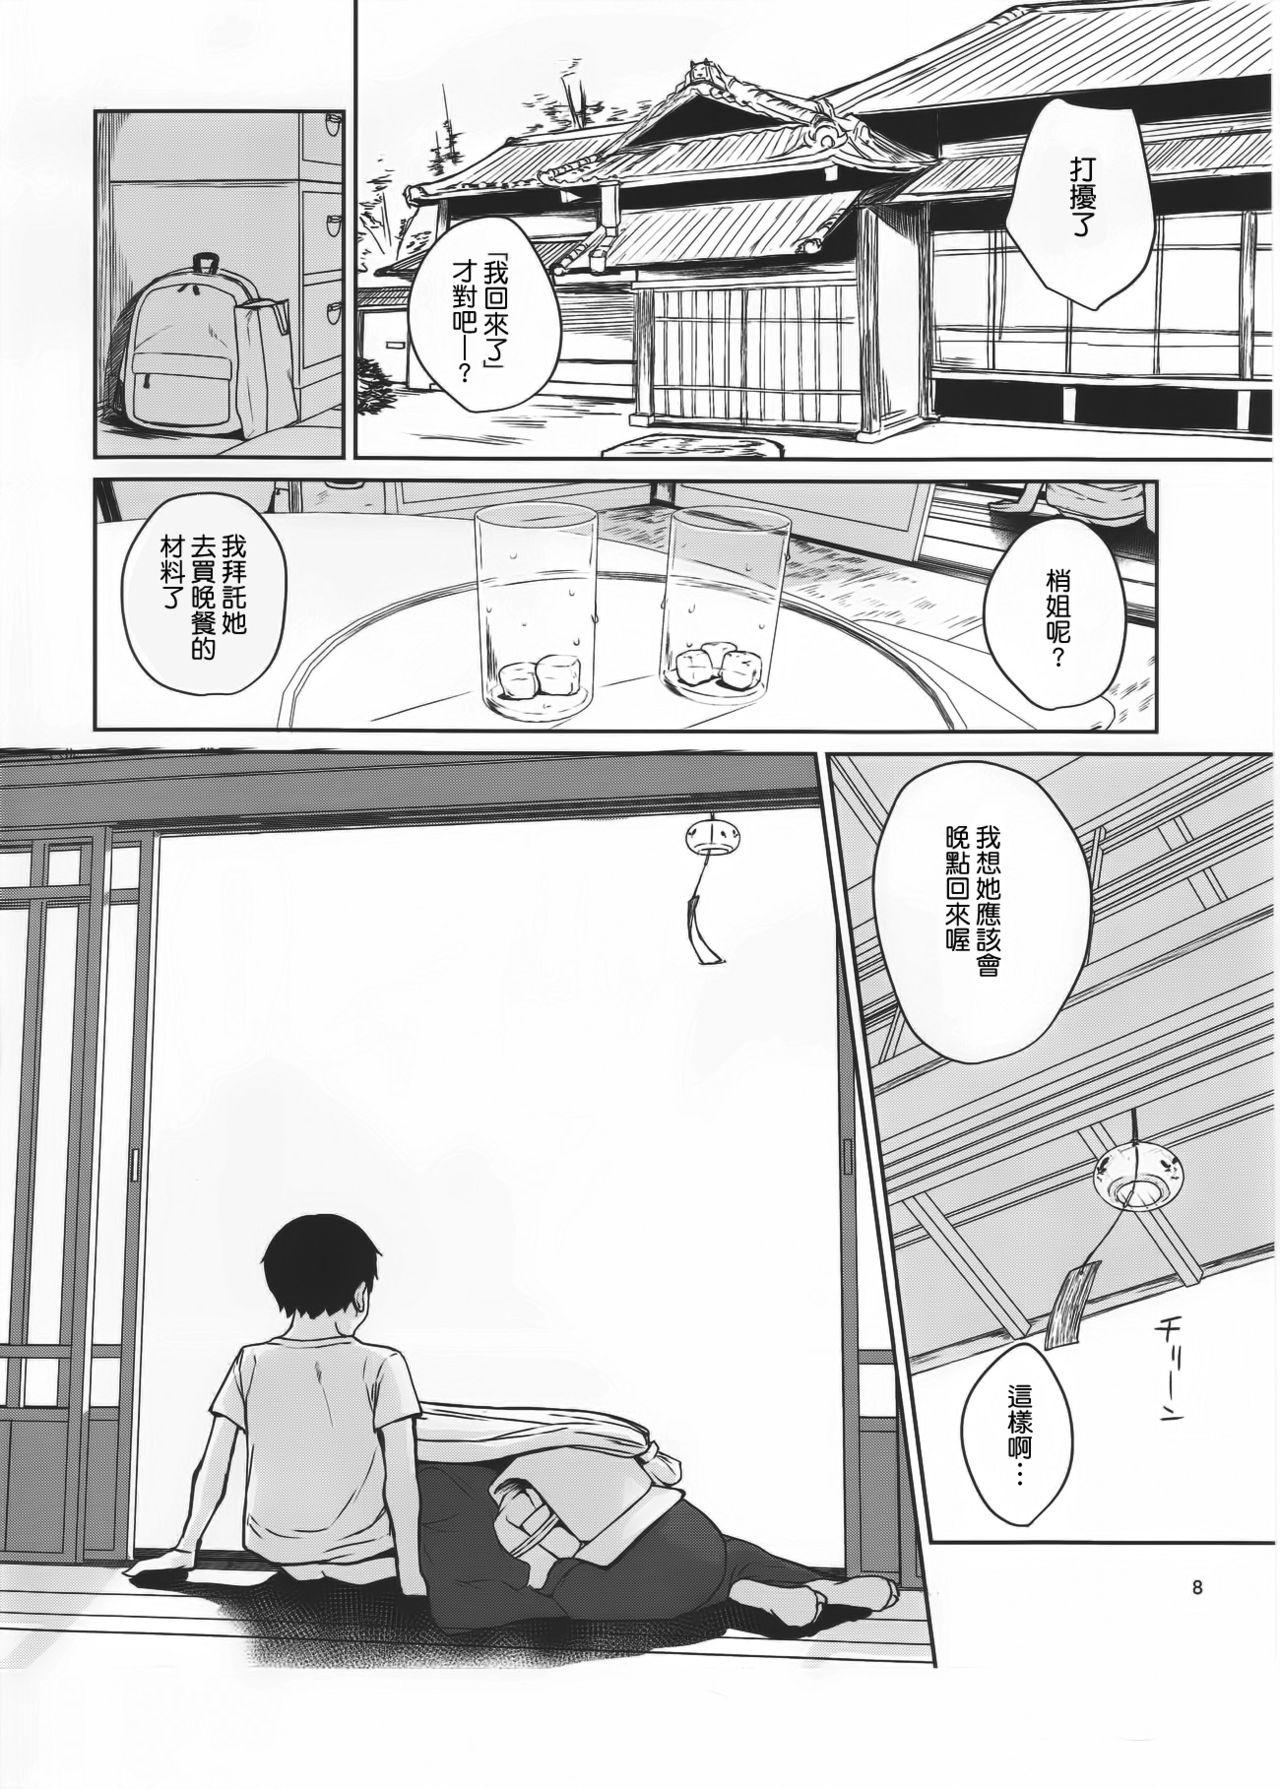 Married Oni no Sumu Ie Gaygroup - Page 8